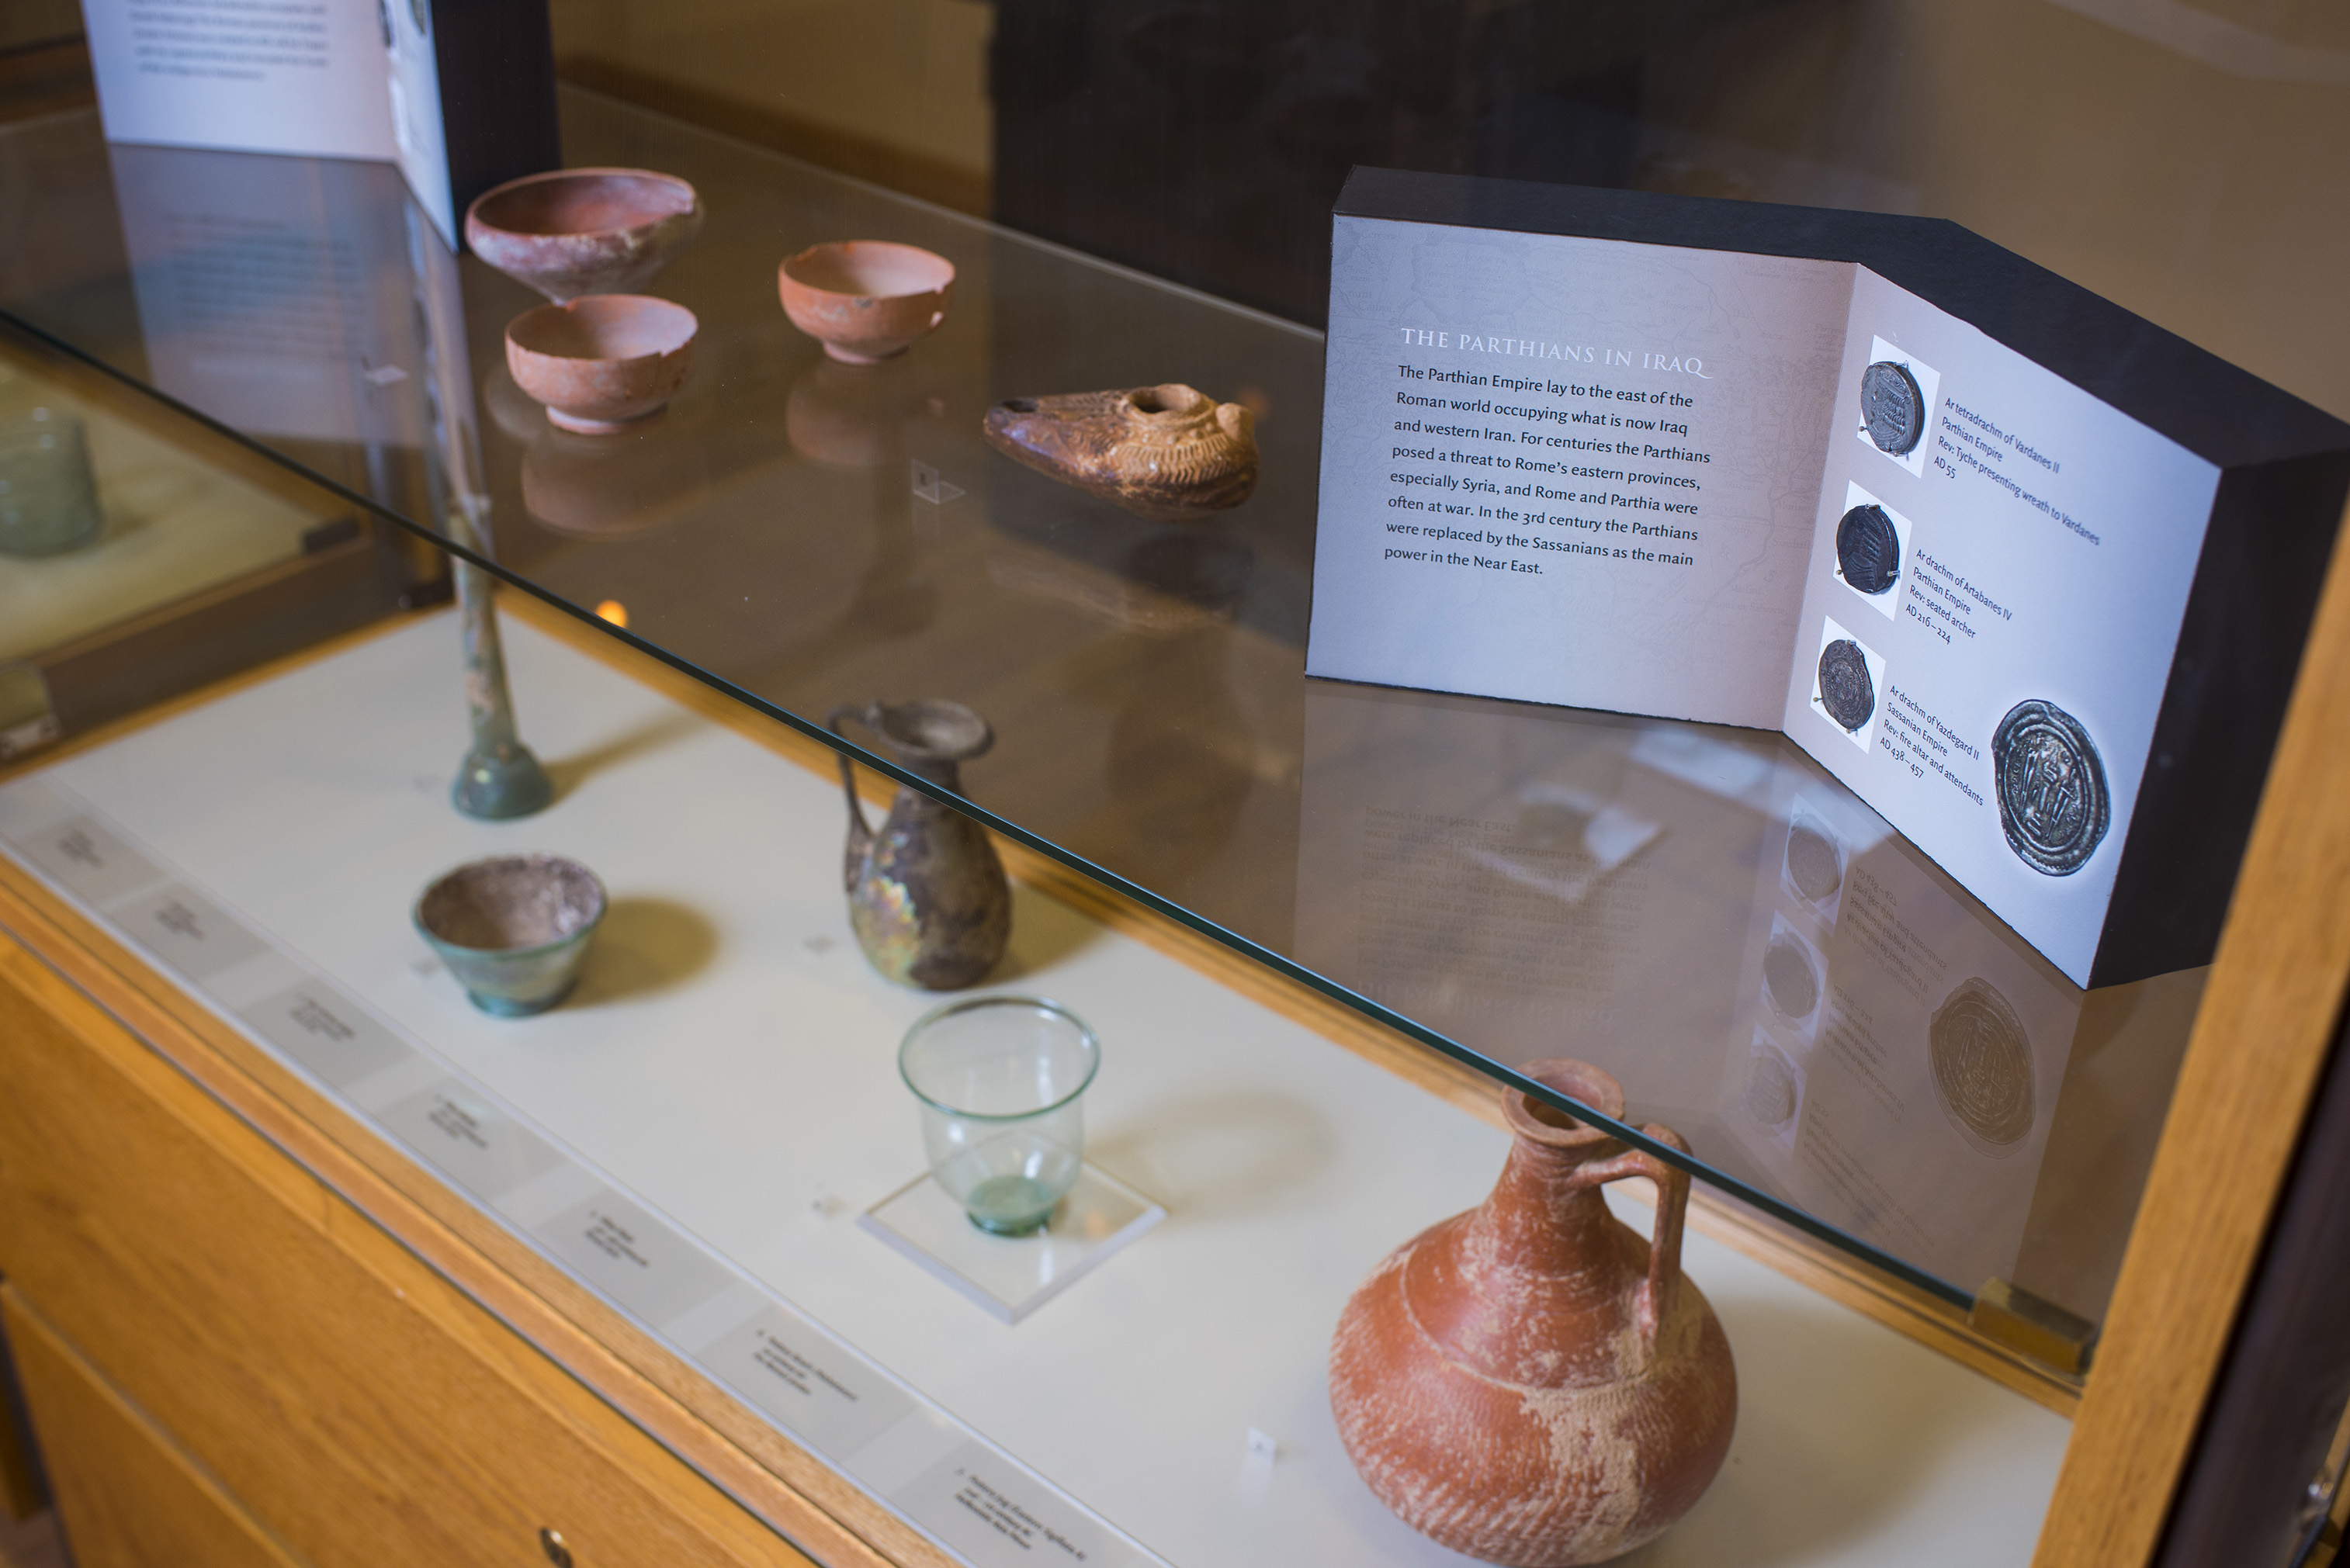 A glass display shelf displaying small clay dishes, amphorae vases, and small glass drinking vessels.